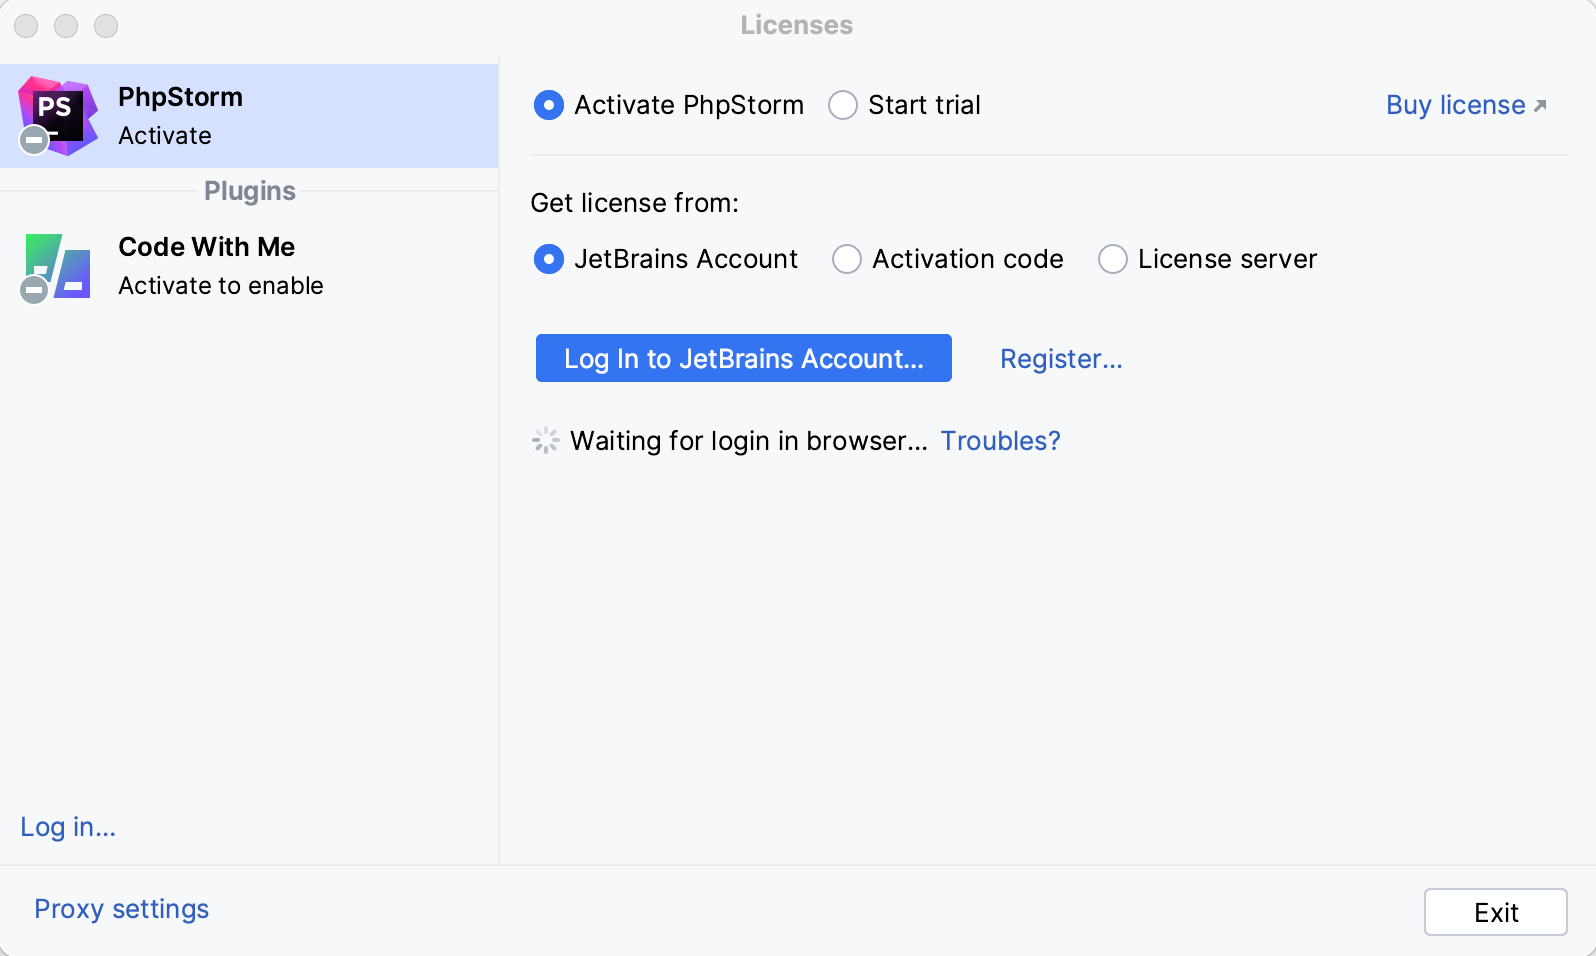 Activate PhpStorm license with a JB Account